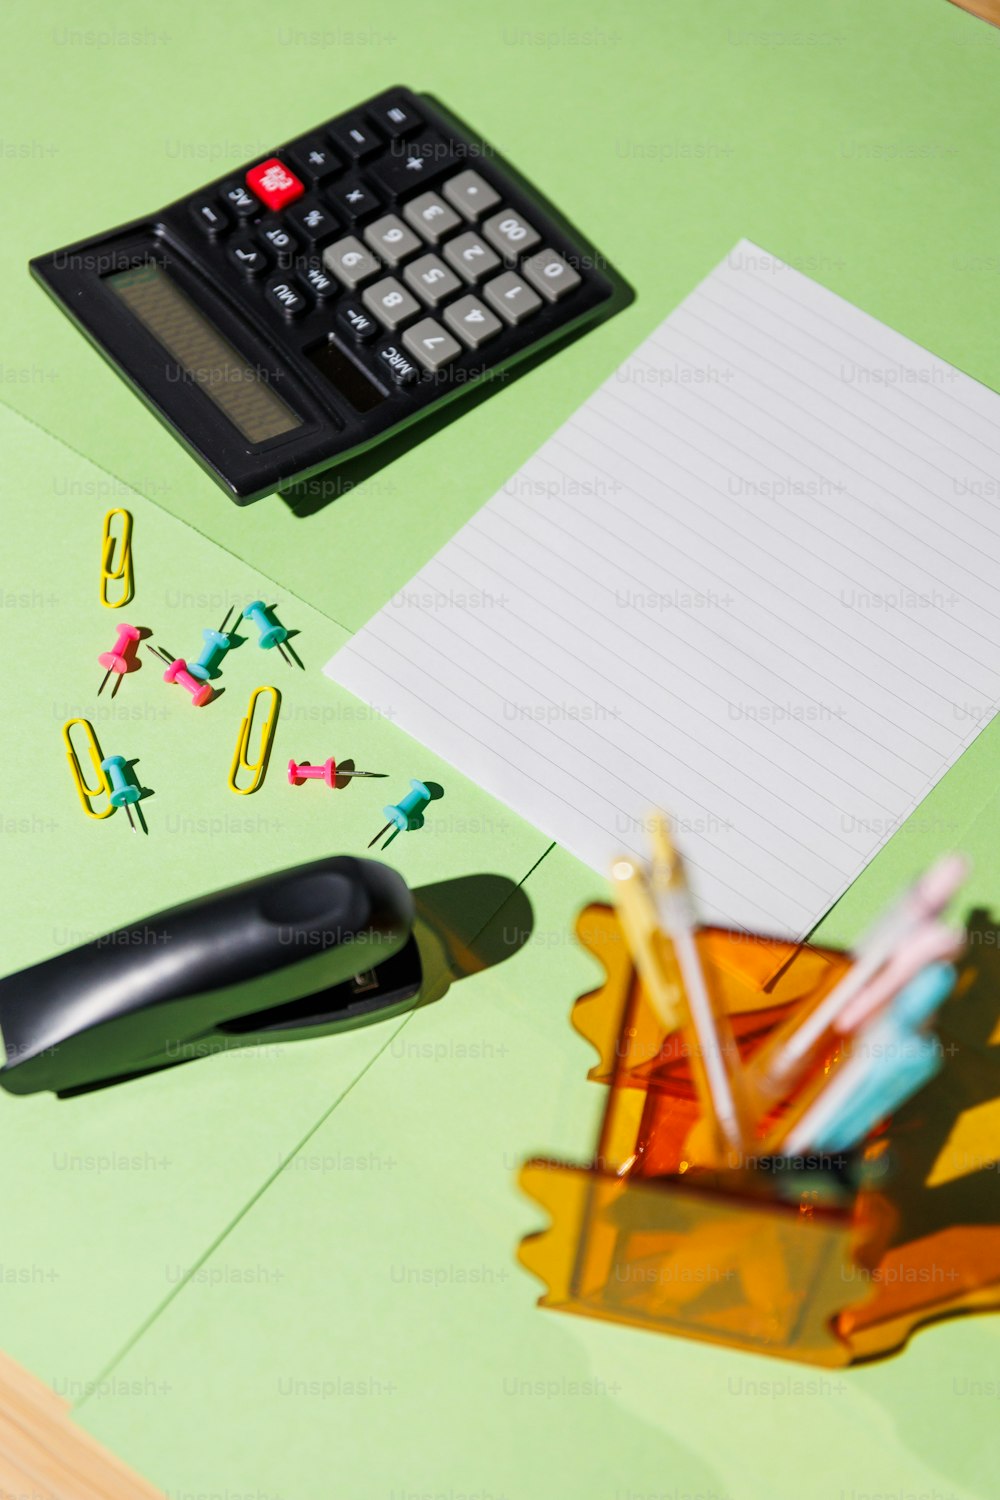 a desk with a calculator, pencils, and a notepad